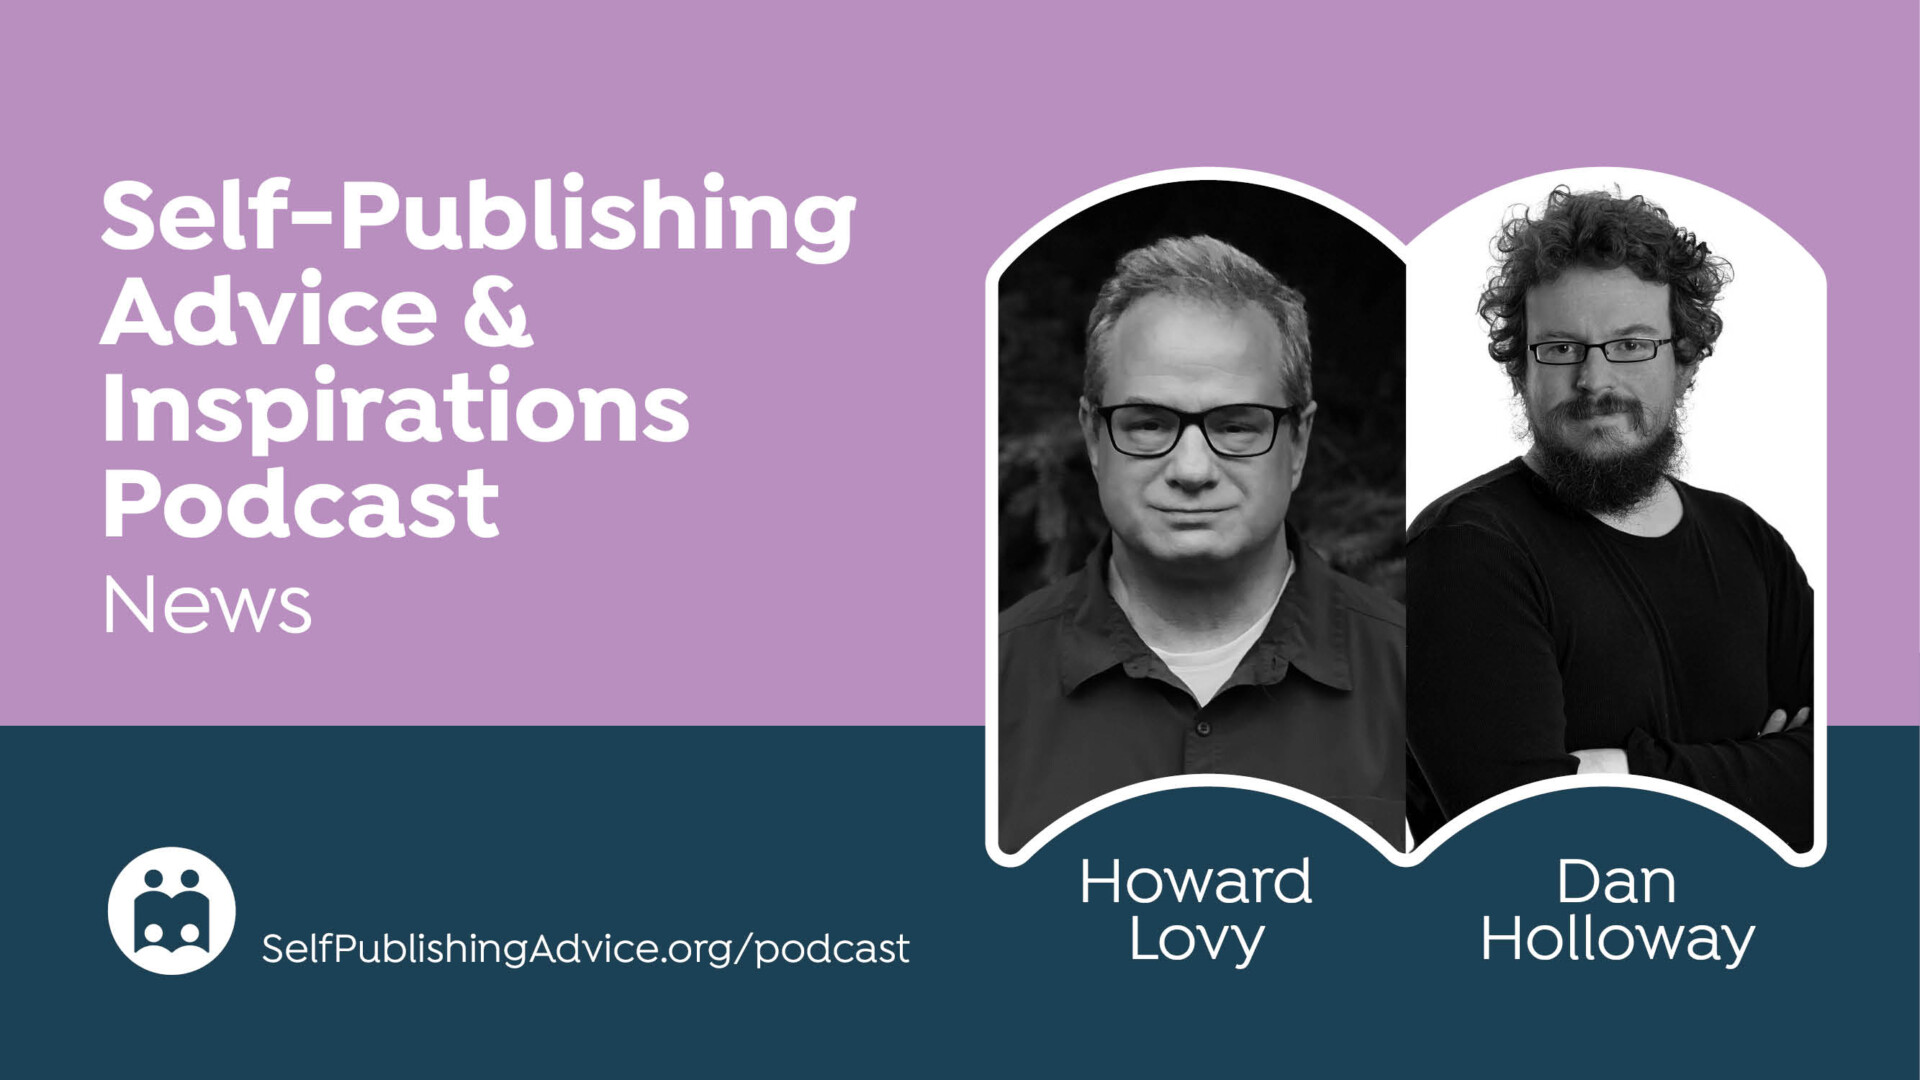 Amazon Amends Returns Policy After Author Pushback; BookTok Is A Double-Edged Sword; AI For Book Discovery: Self-Publishing News Podcast With Dan Holloway And Howard Lovy